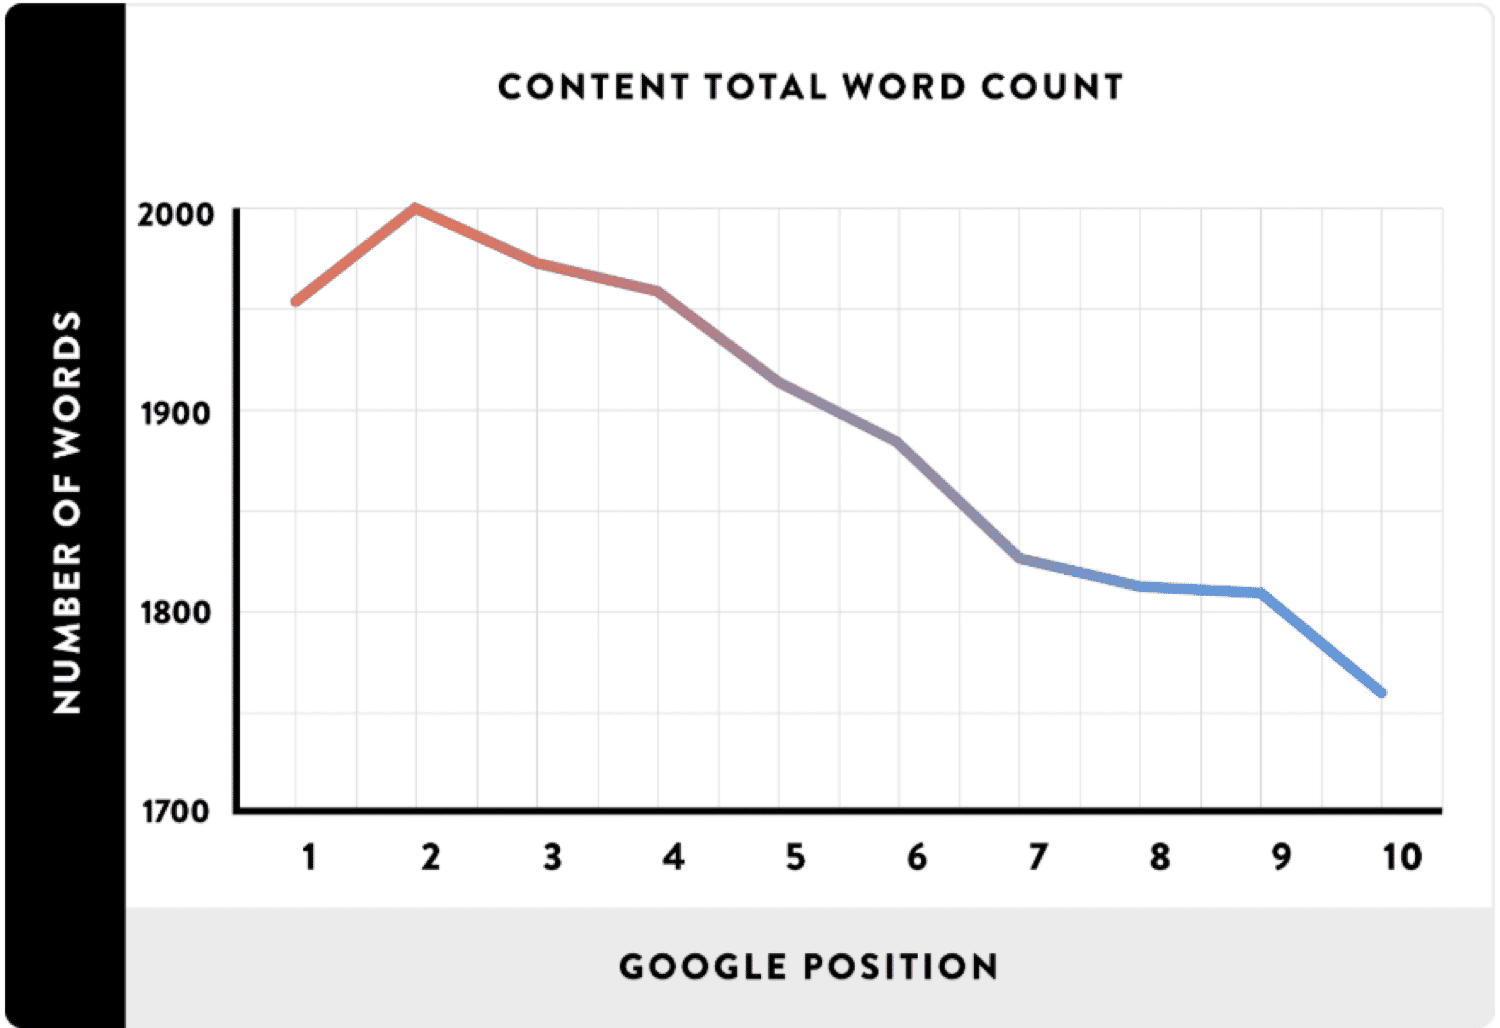 Word count vs ranking position in Google